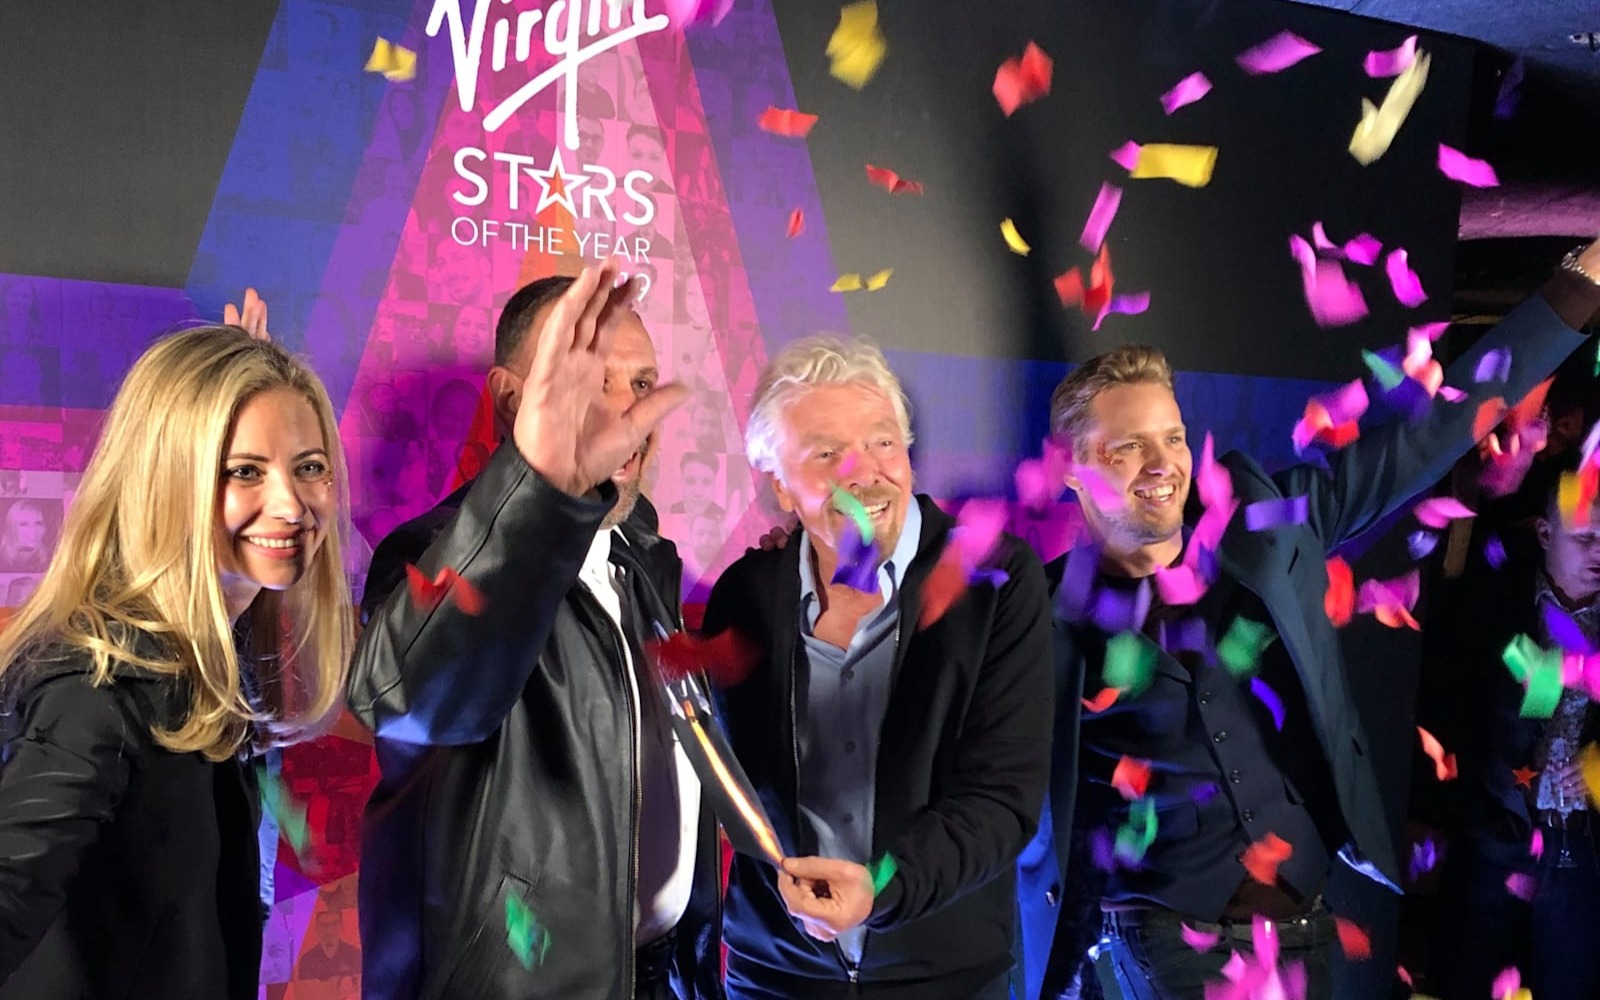 Richard, Sam and Holly Branson with the Virgin Stars of the Year winner